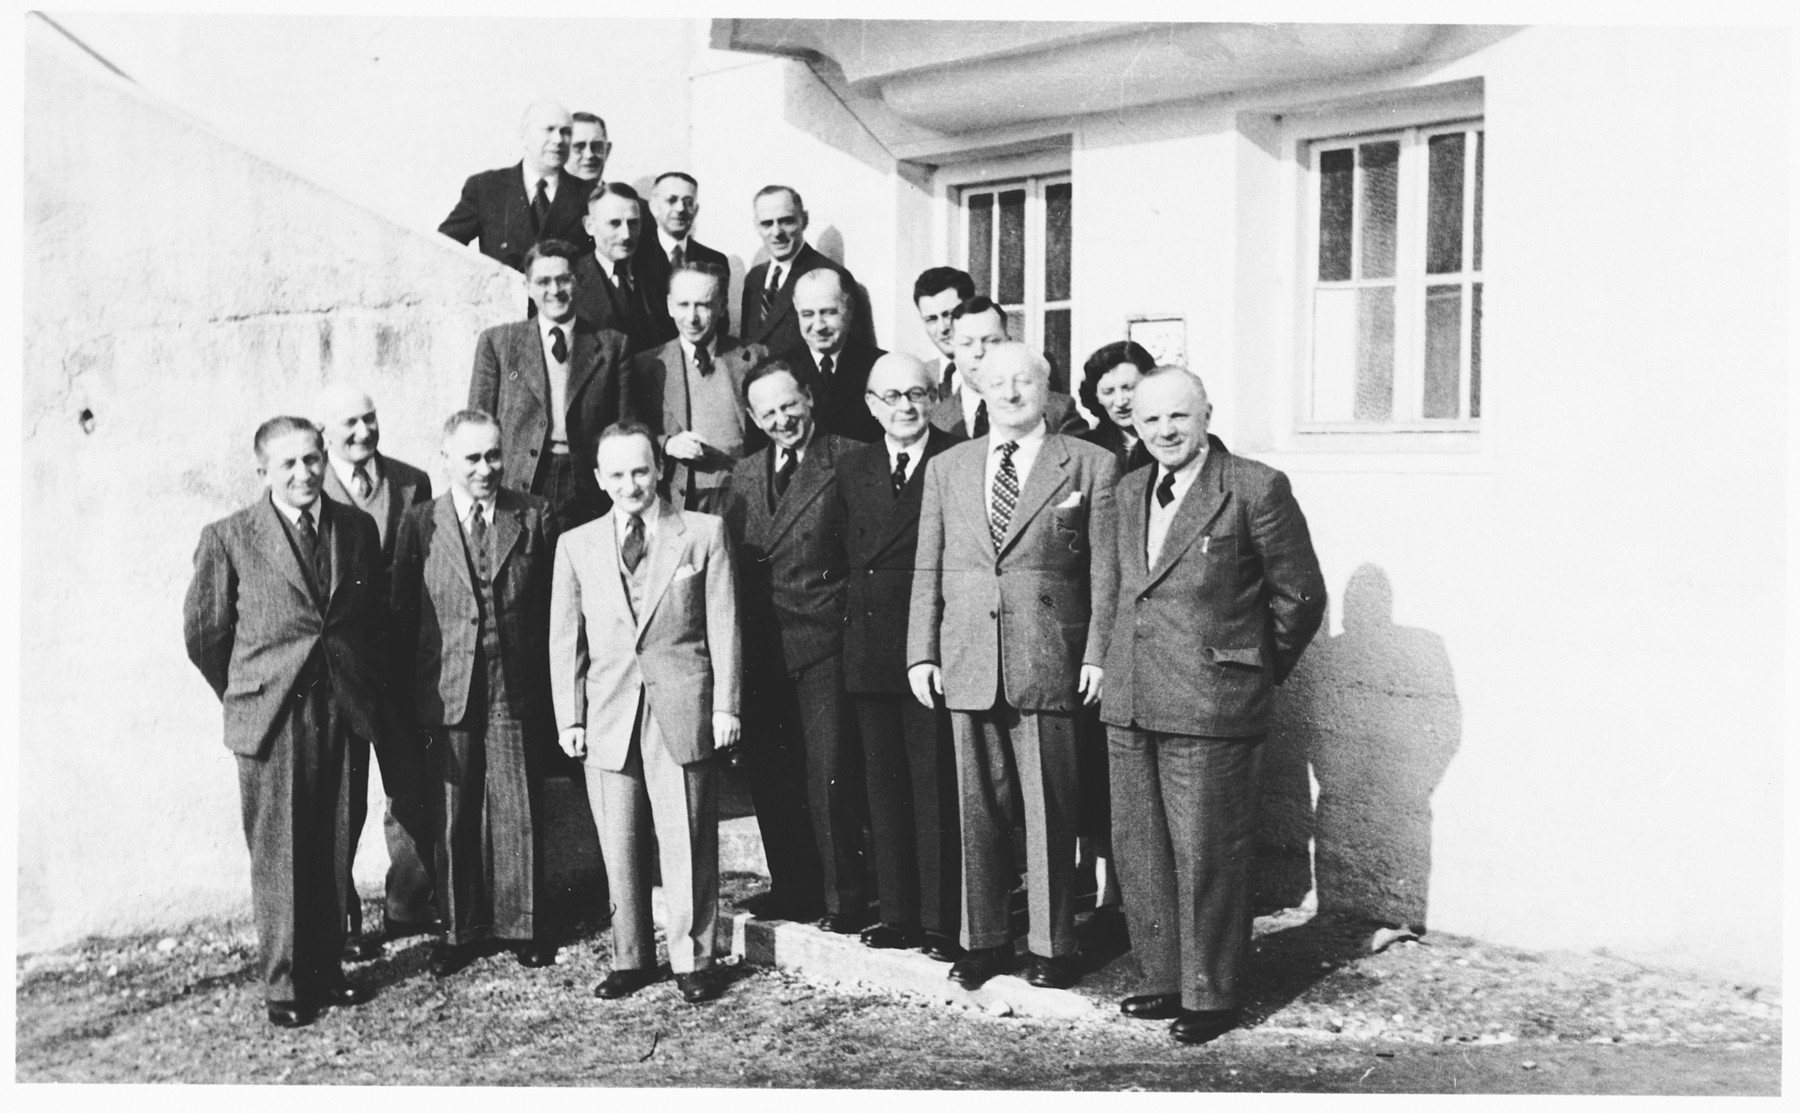 Group portrait of members of the Jewish Restitution Successor Organization (JRSO) at a staff conference in Nuremberg, Germany.

Benjamin Ferencz, the director of the JRSO, stands at the front in the lighter jacket. Also pictured is Dr. Arthur Barczinski (later Arthur Barry), in the second row, third from the left.